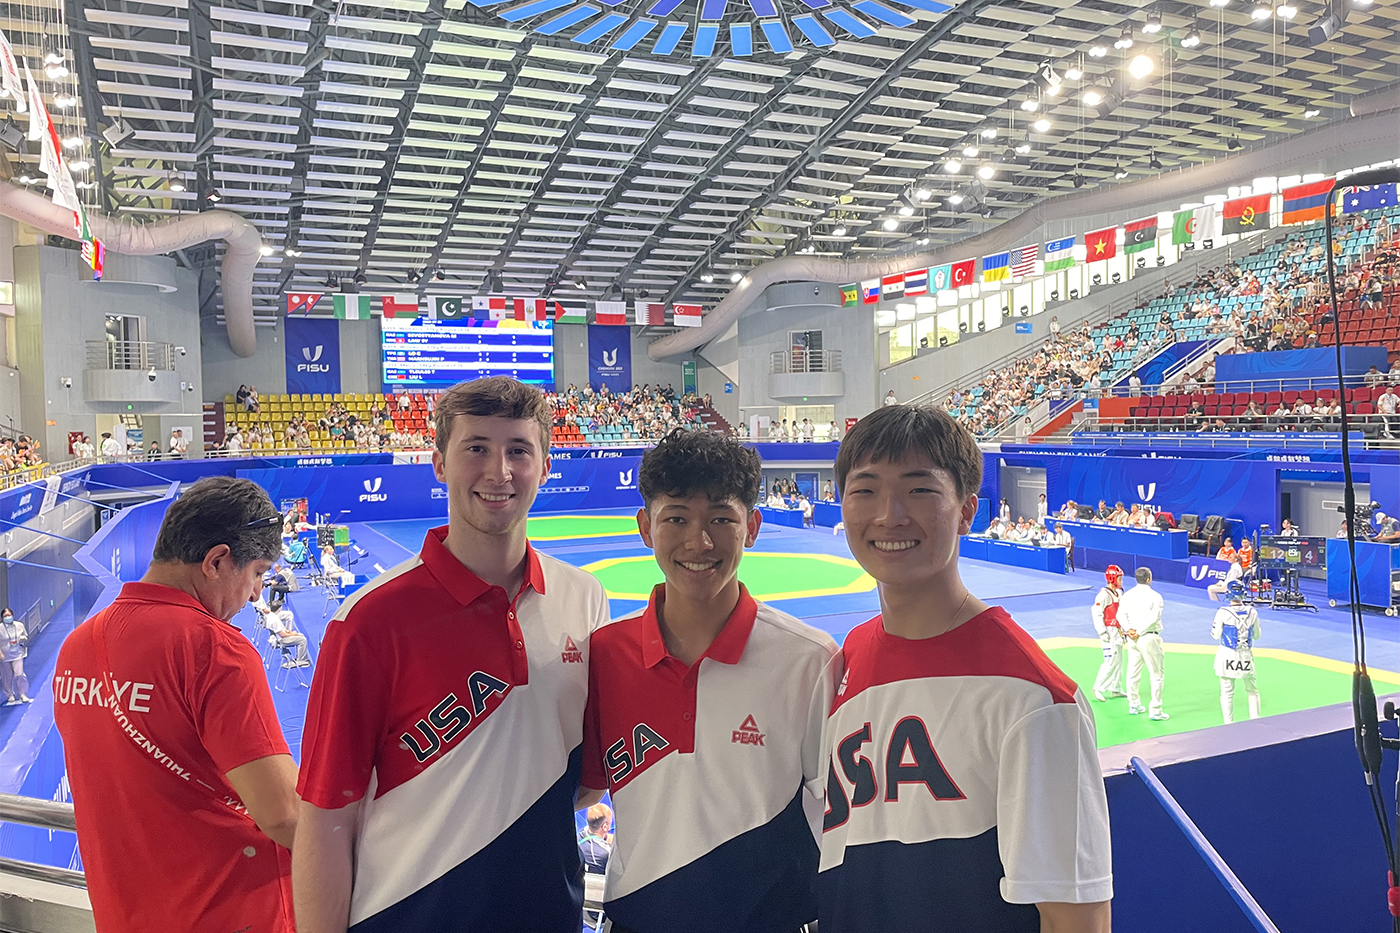 Brian Meagher with other USA team members